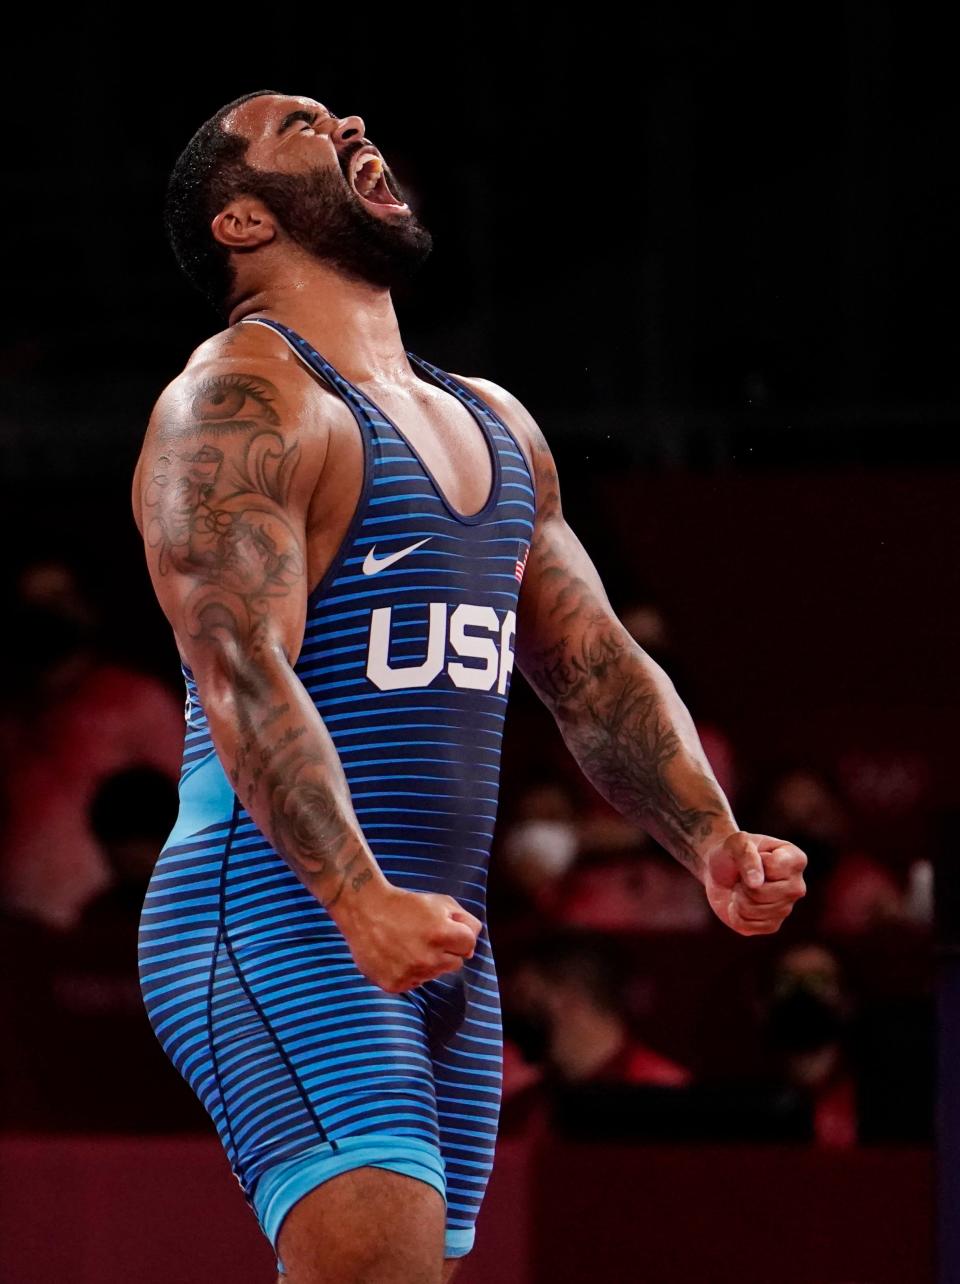 Gable Steveson celebrates after defeating Geno Petriashvili in the men's freestyle 125kg final.